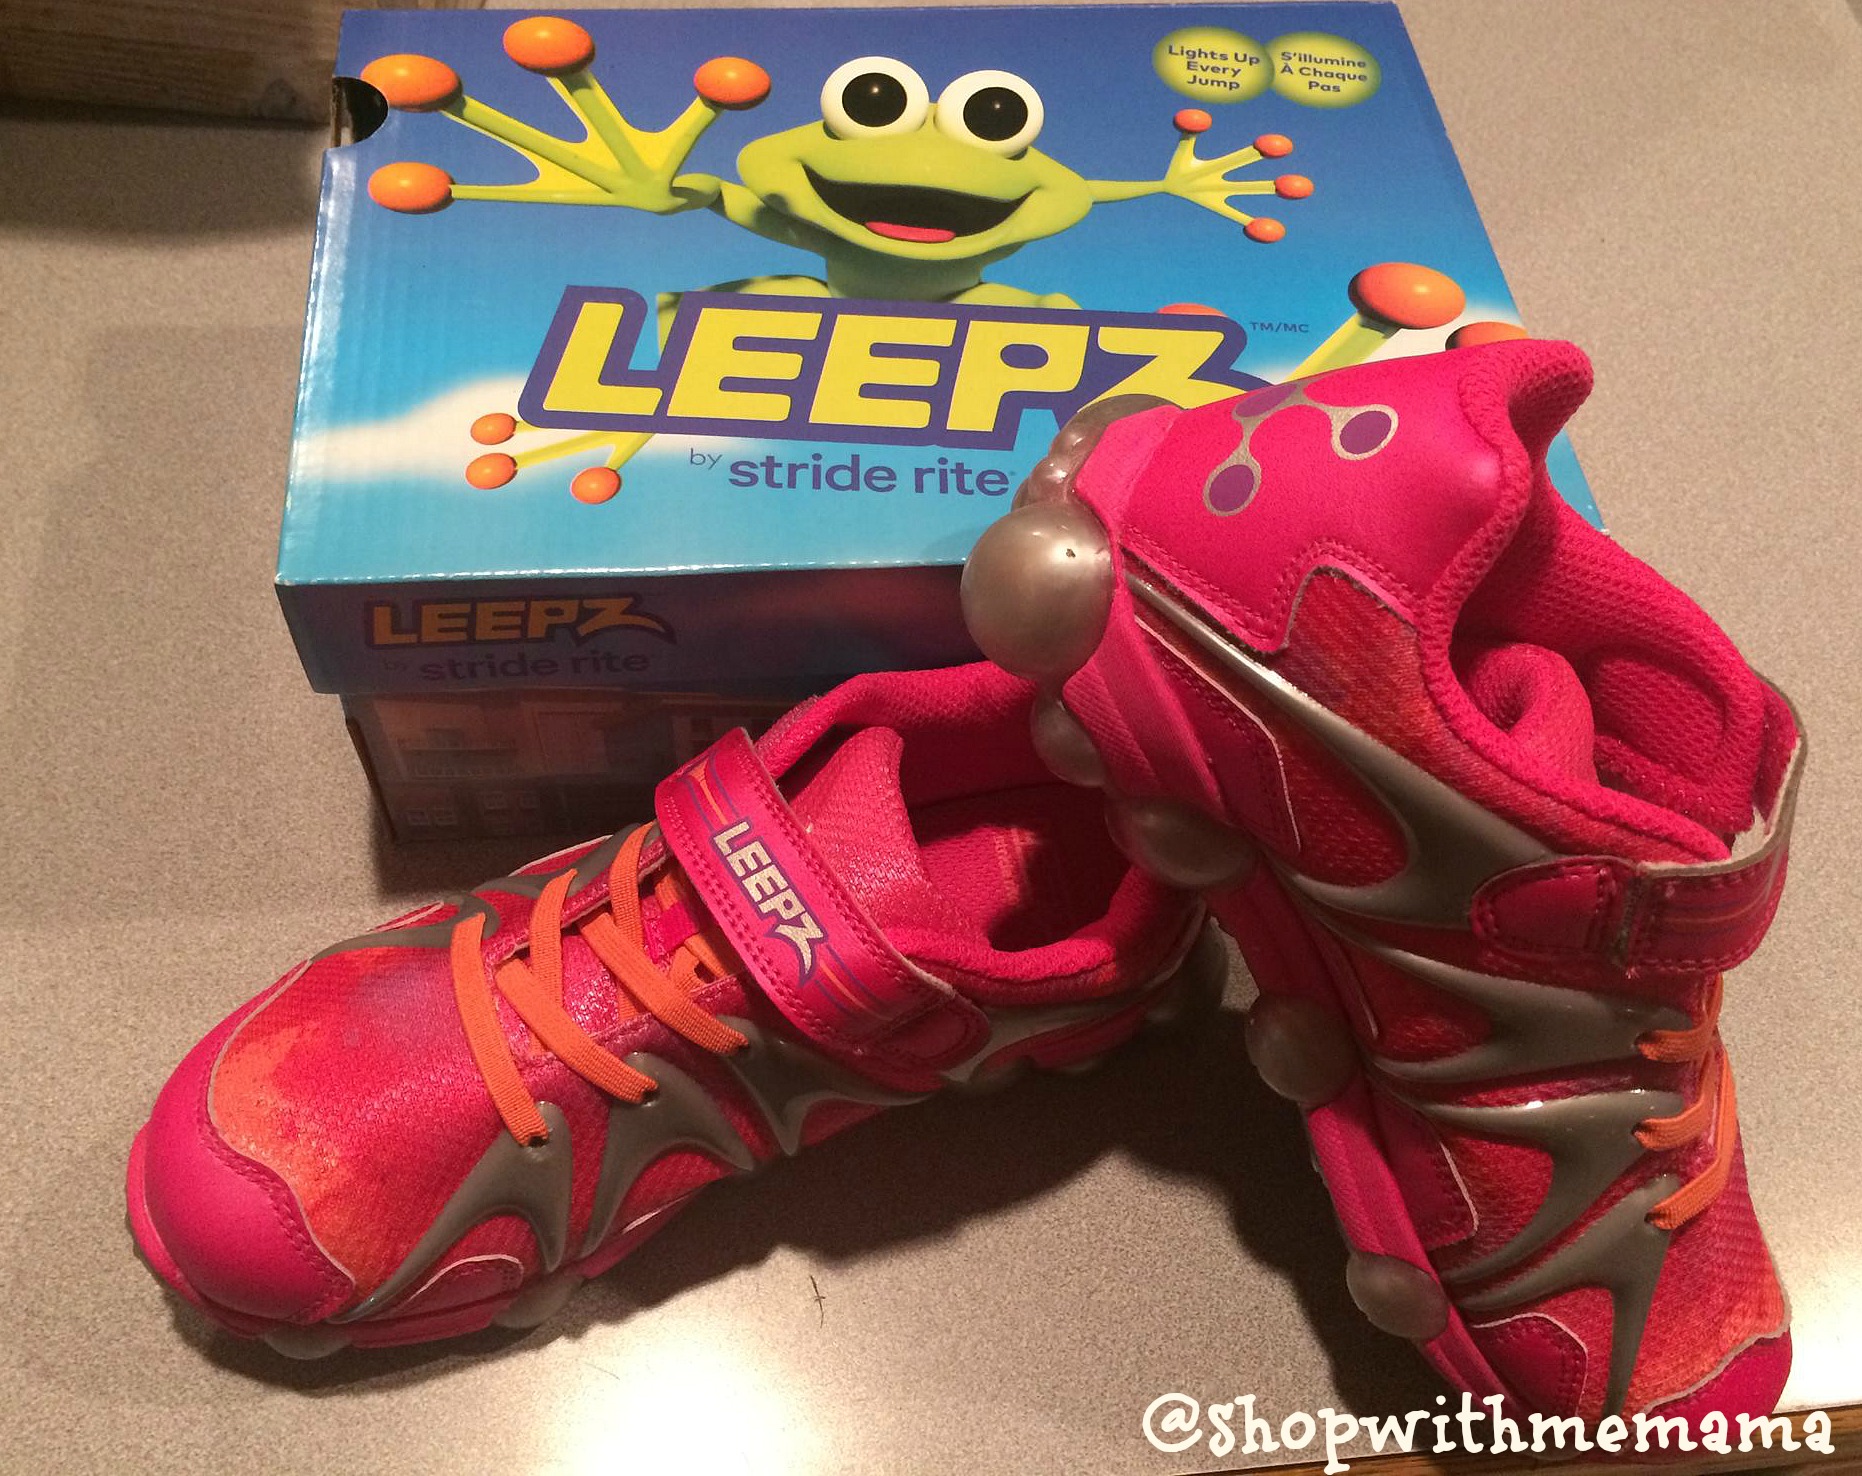 Check Out The New Stride Rite Leepz And Phibian Sneakers